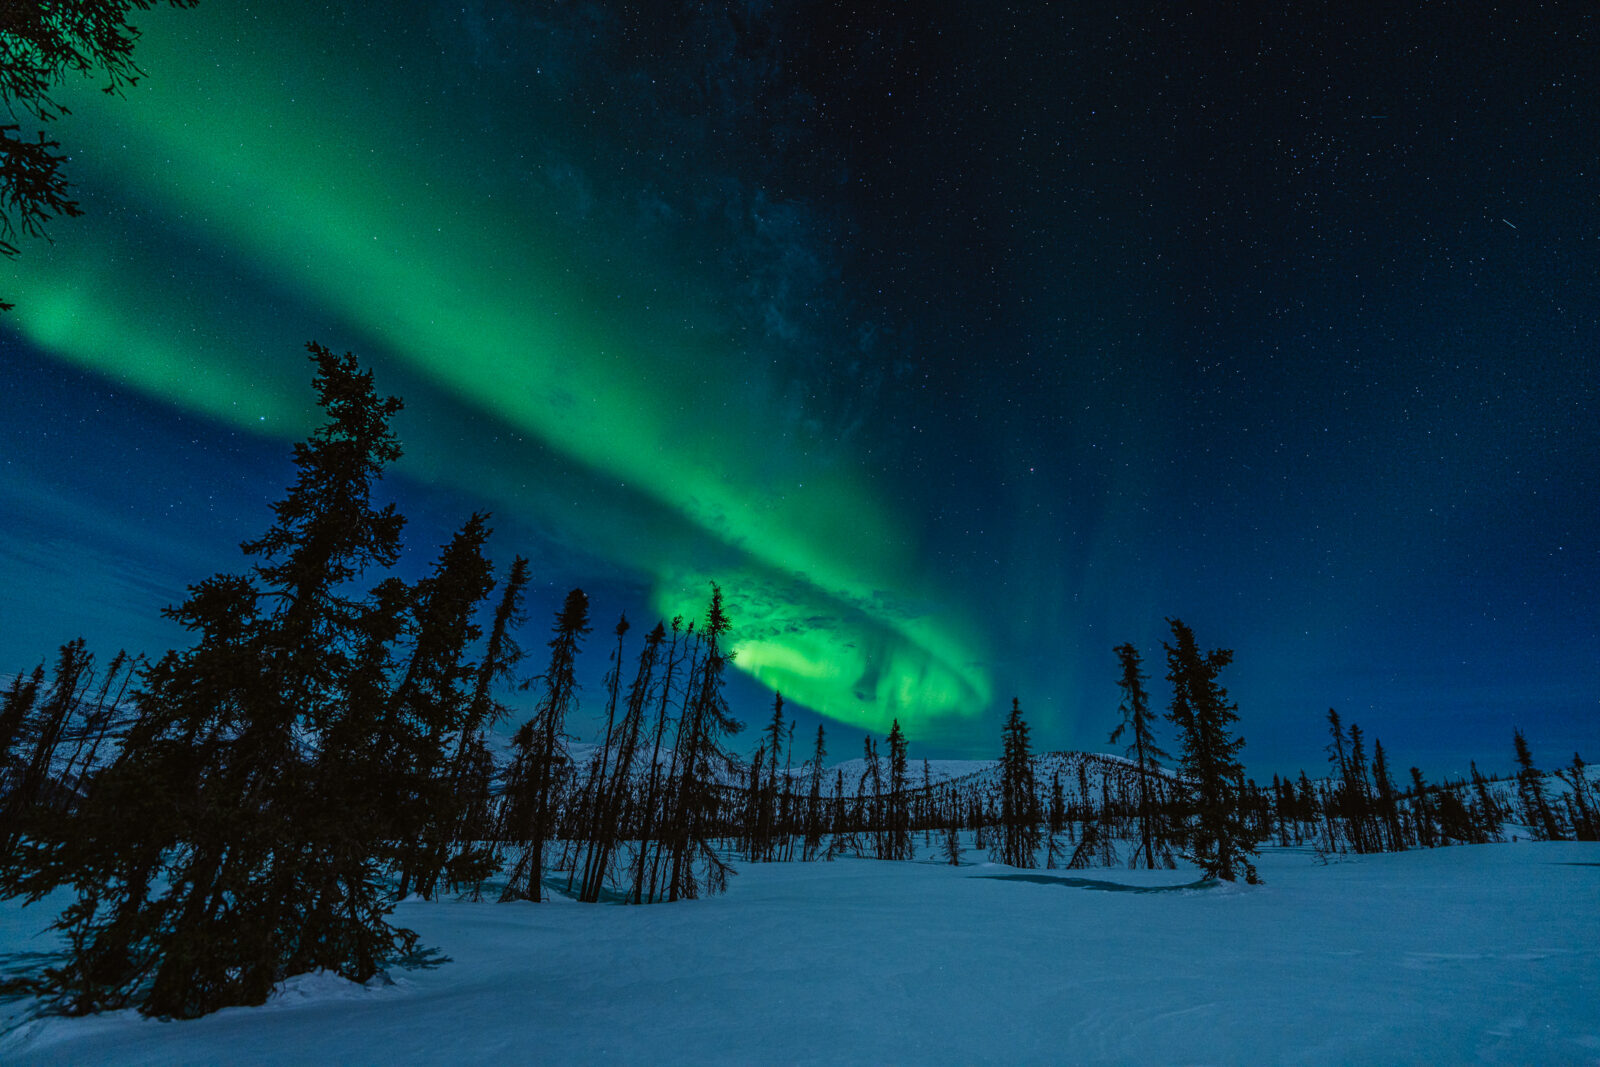 How to elope in Alaska and see the Northern Lights